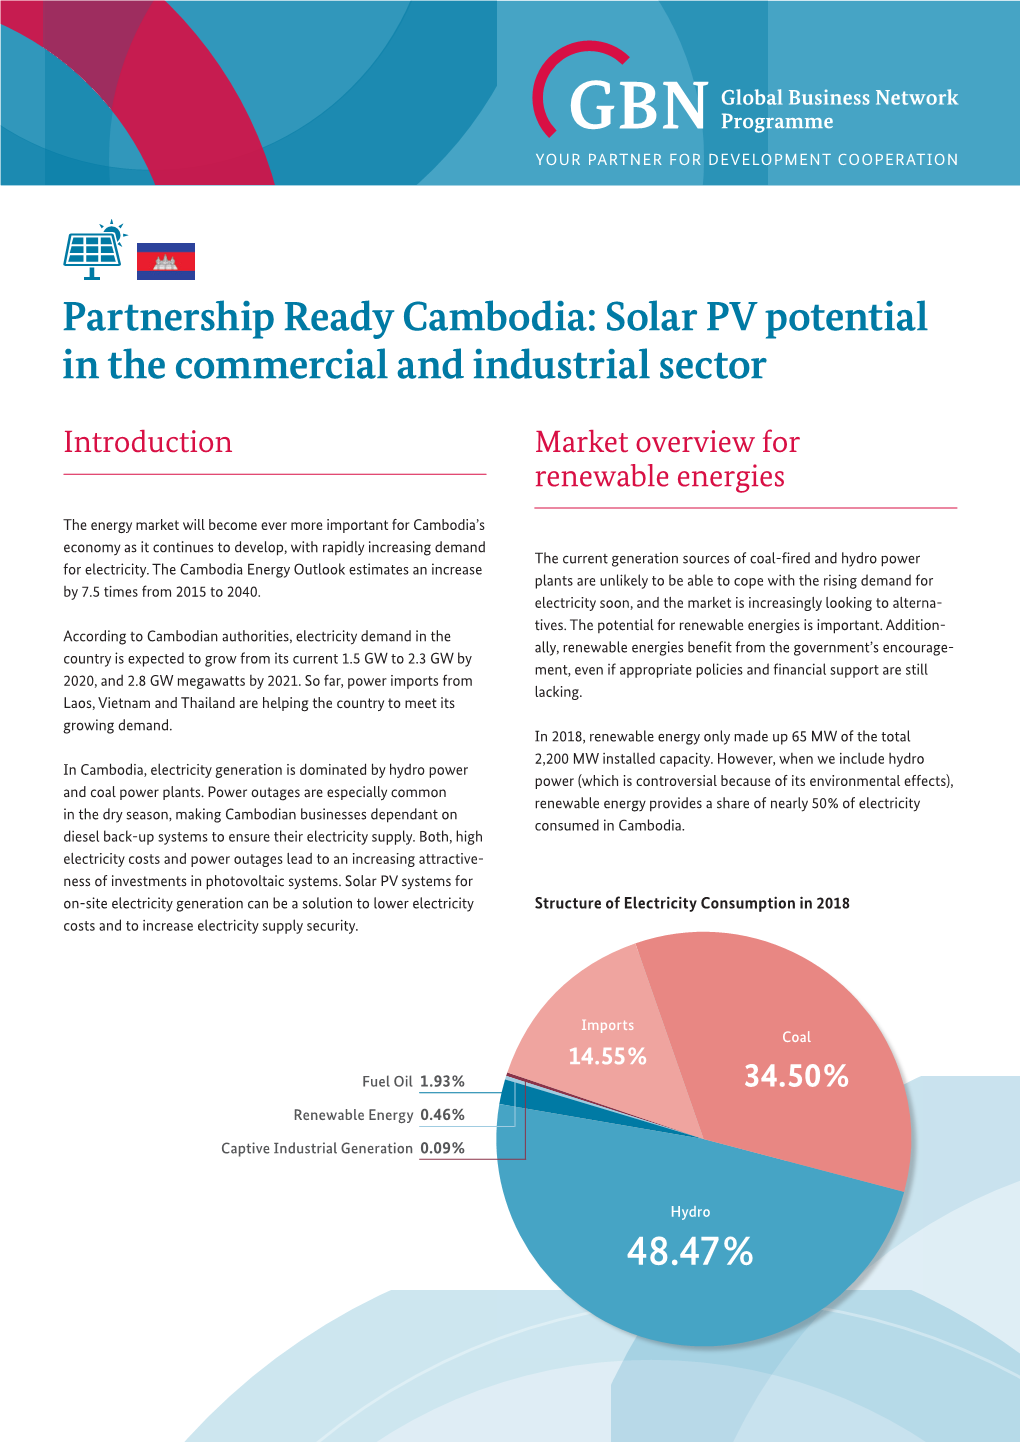 Partnership Ready Cambodia: Solar PV Potential in the Commercial and Industrial Sector